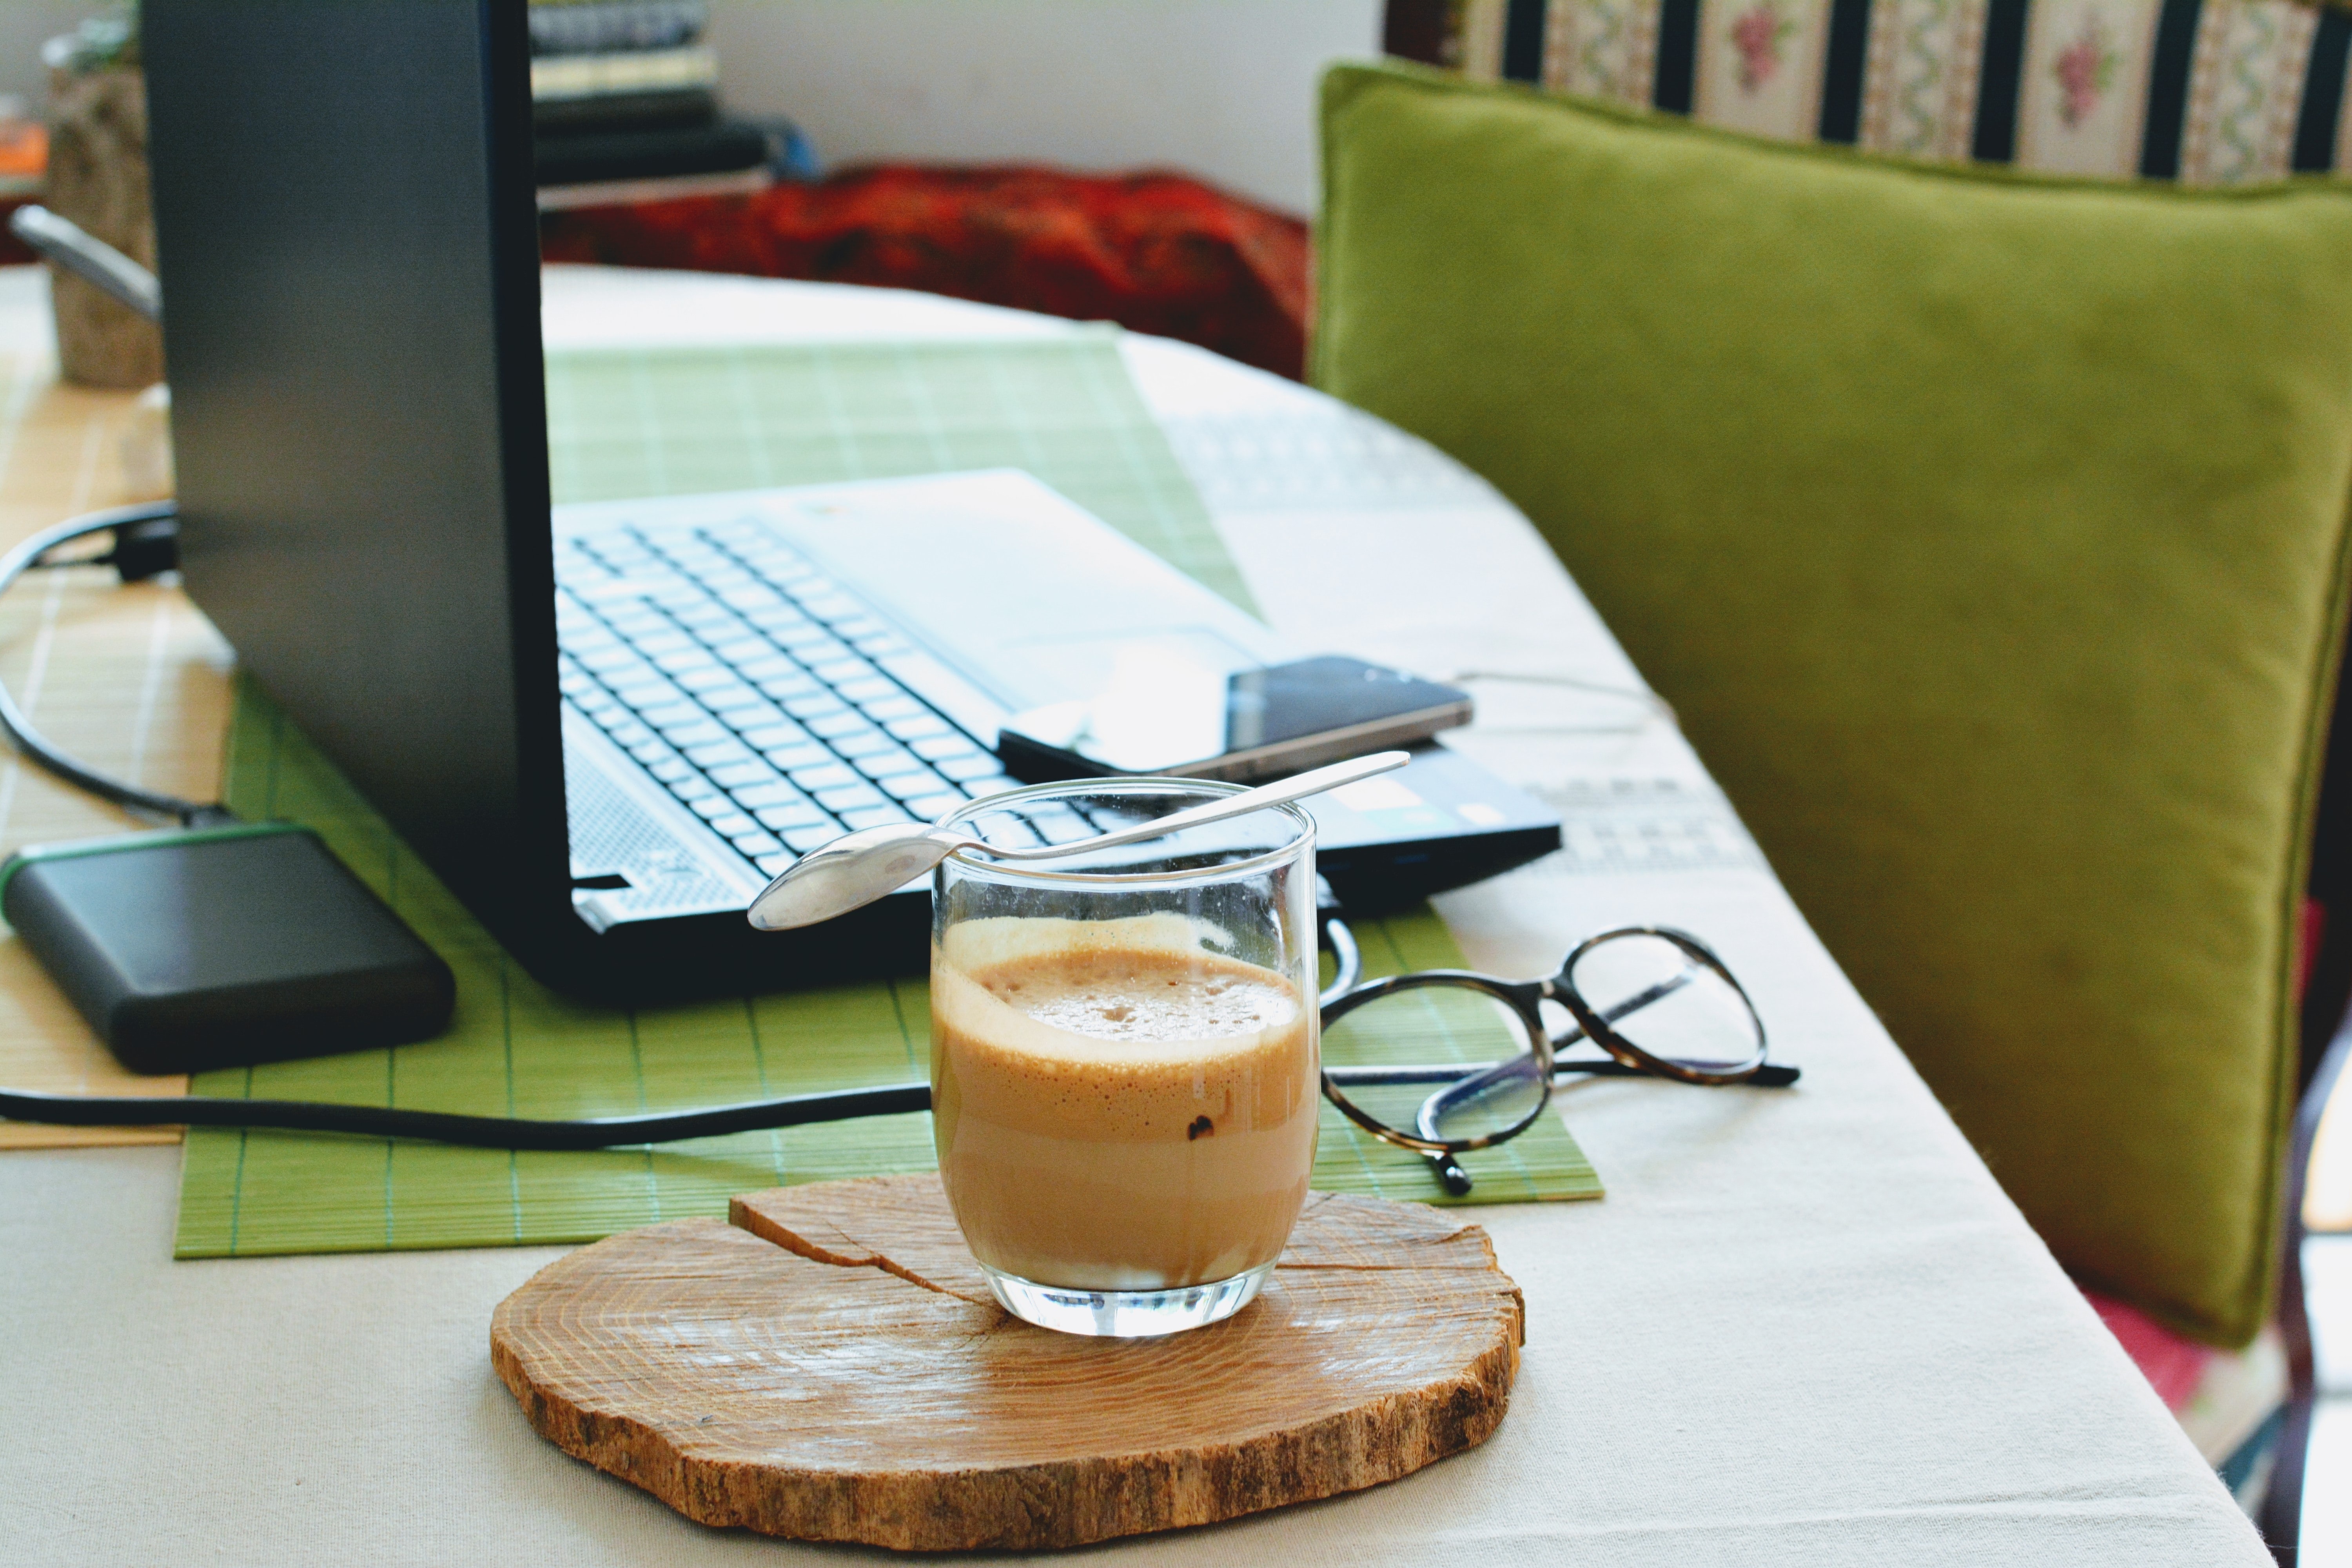 Computer and coffee set up at home - work from home solutions - Inderly IT